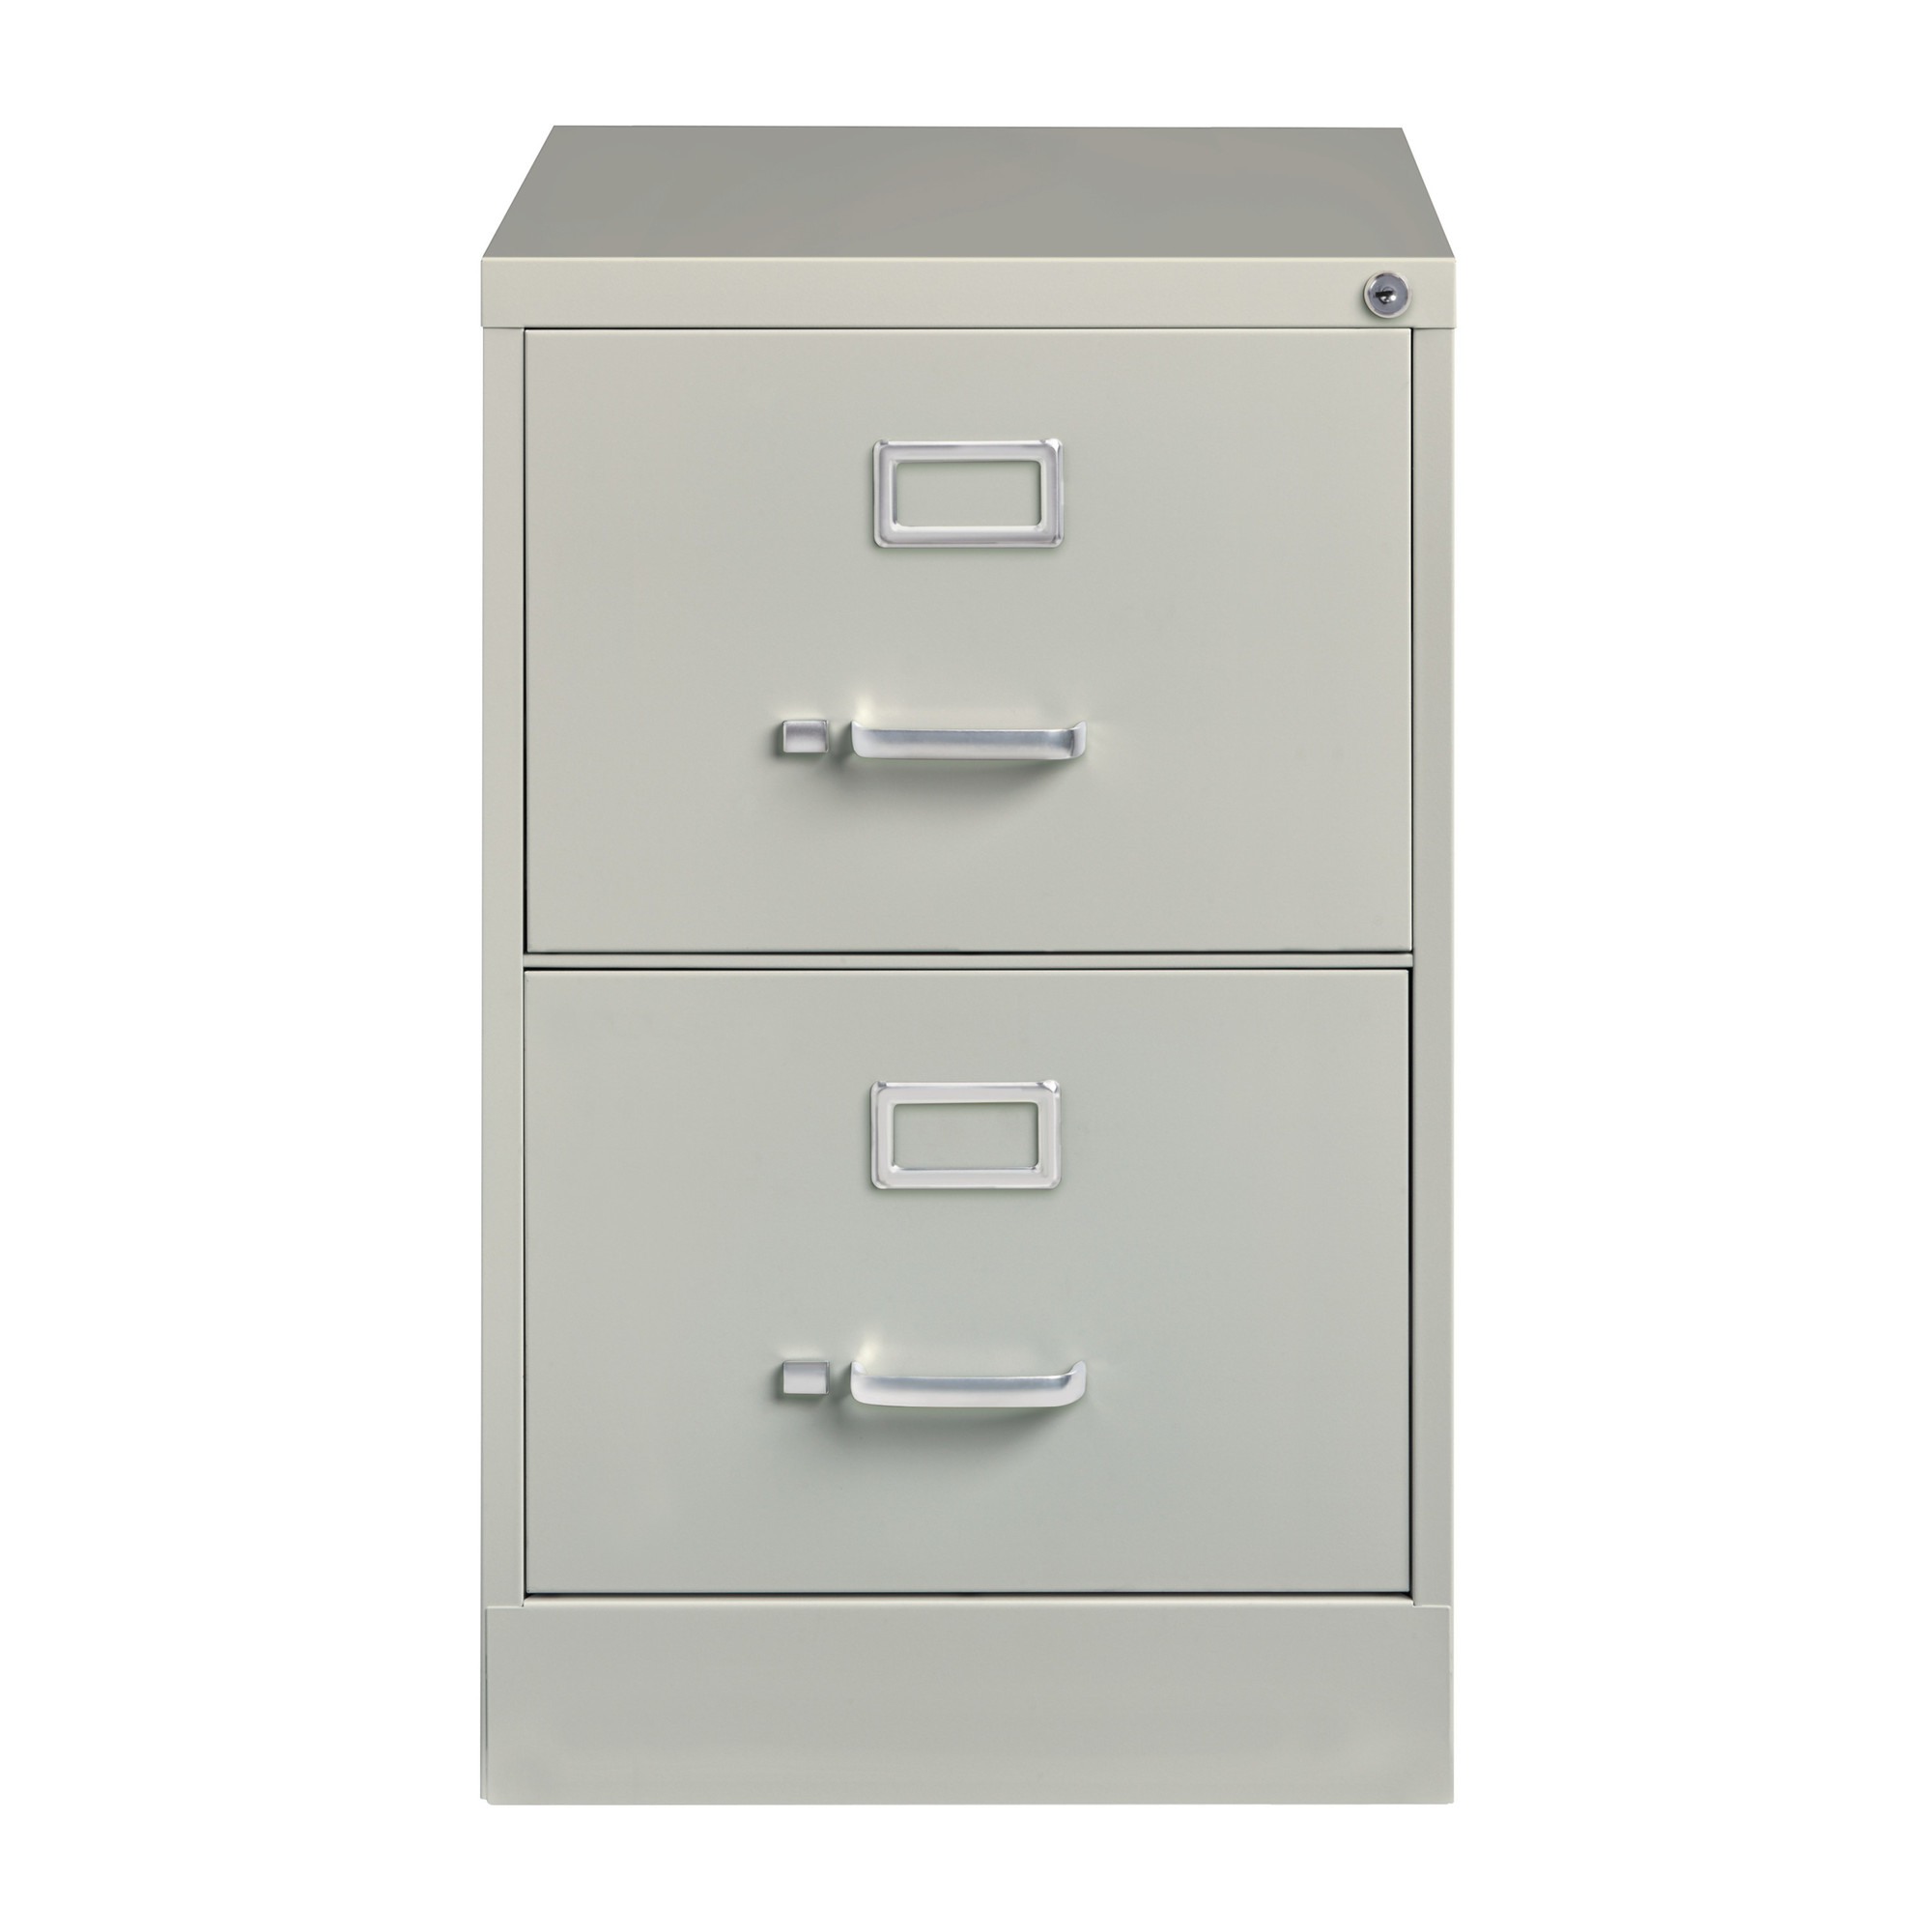 Hirsh Industries, 2 Drawer Legal Width File Cabinet Commercial Grade, Width 18 in, Depth 25 in, Height 28.375 in, Model 14414